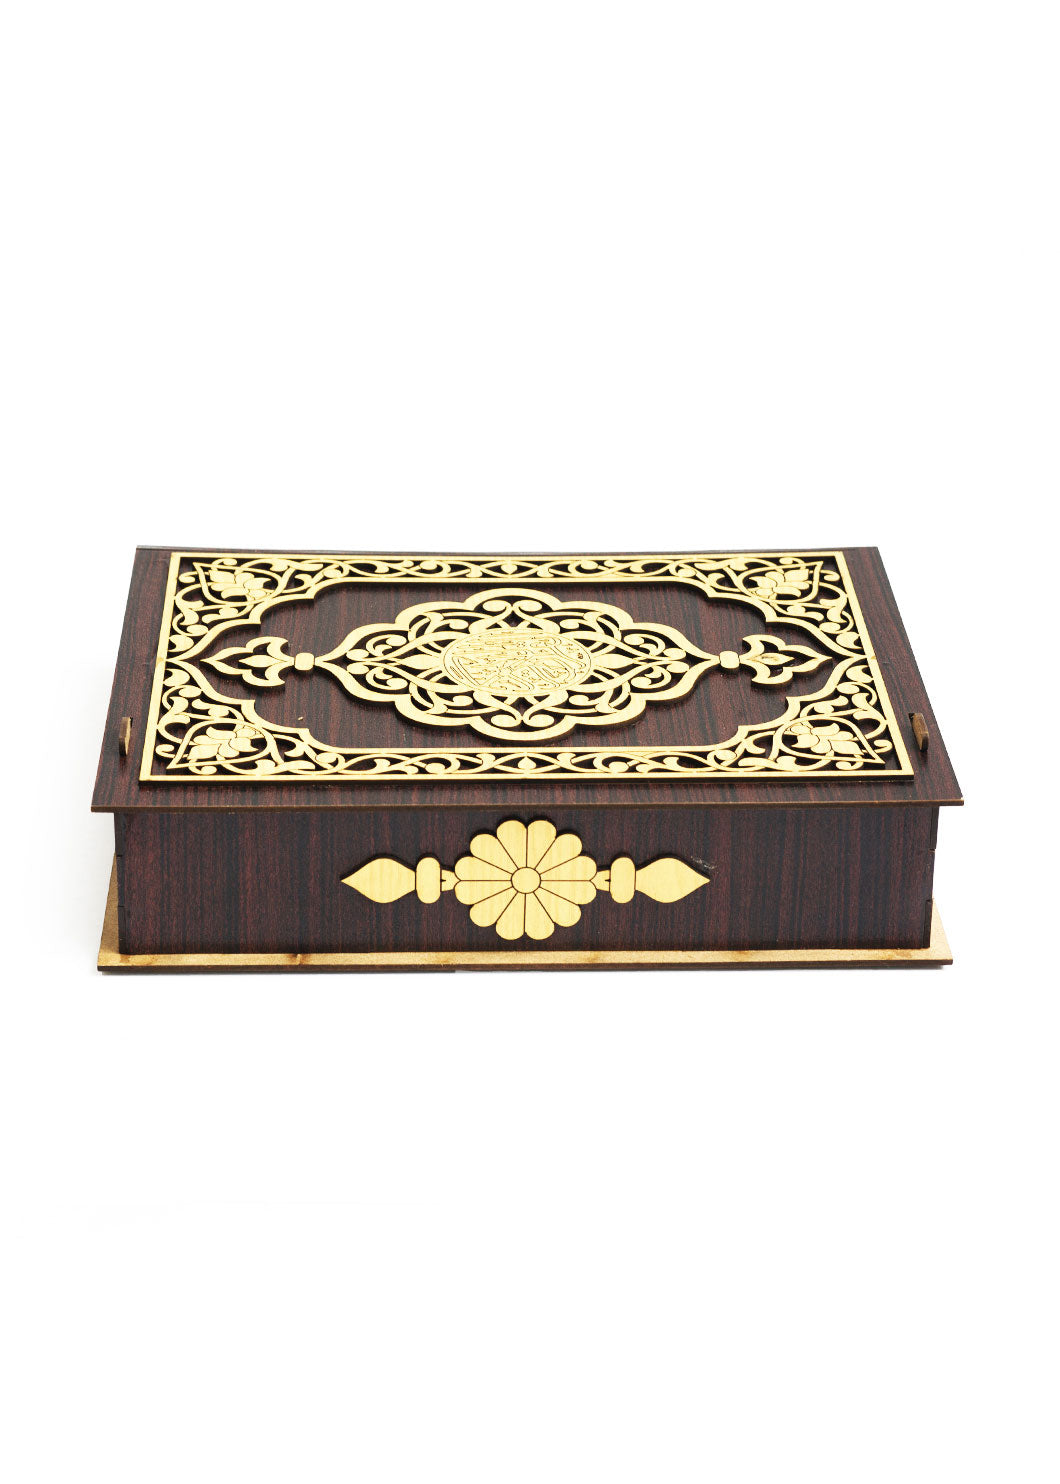 Dark Bown Wooden Box With Badge Carvin Gift Box For Quran - Wooden Juzdaan - Quran Ghilaf - Premium Wooden Box - For Quran